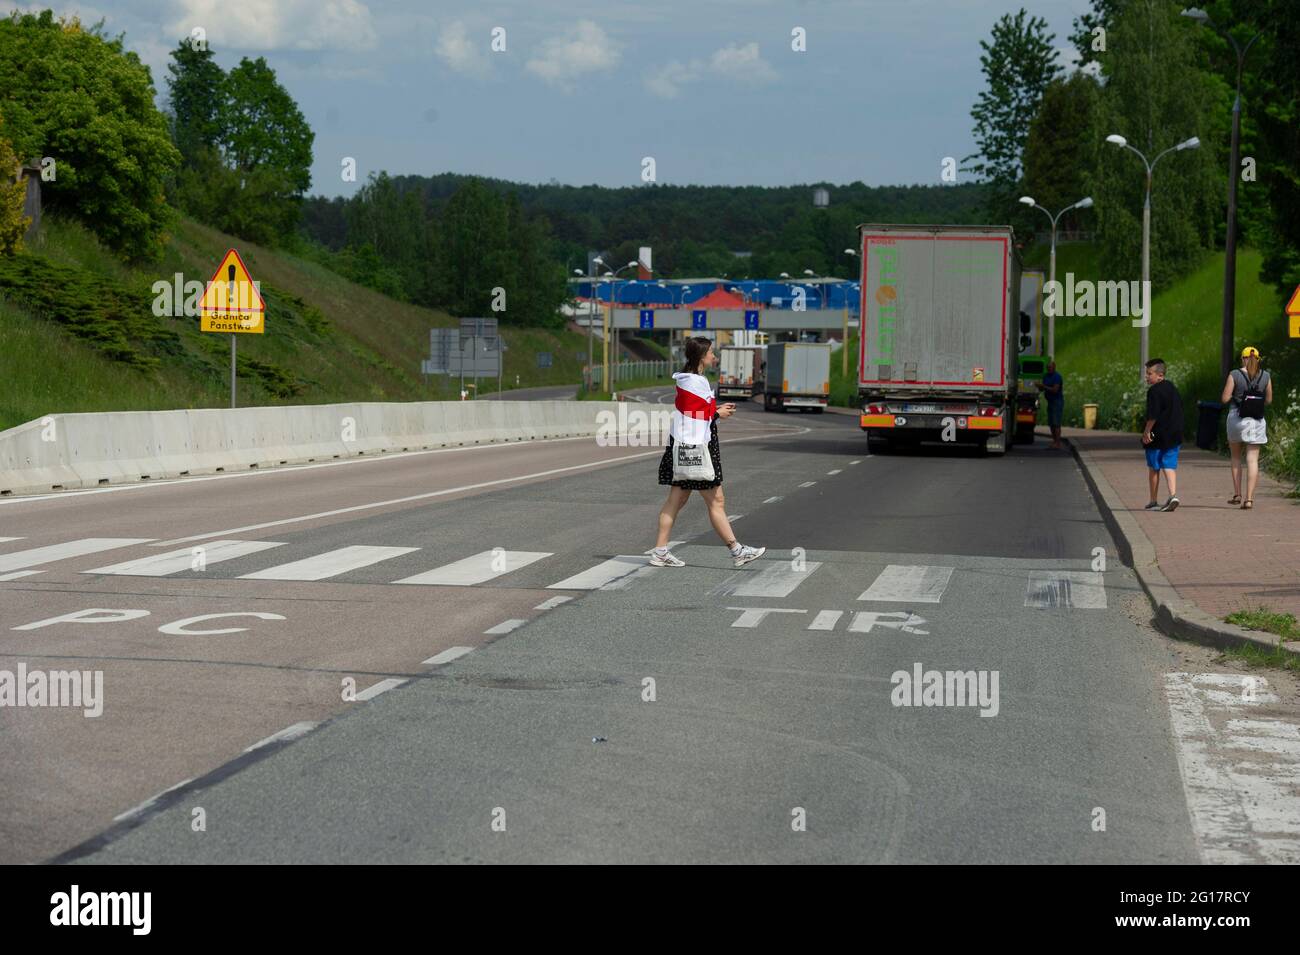 Warsaw, Warsaw, Poland. 5th June, 2021. A protester wears a historical Belarusian flag while crossing the street at the Polish-Belarusian border on June 5, 2021 in Bobrowniki, Poland. Around a hundred of Belarusian citizens on exilein Poland gathered in Bobrowniki, on the Polish-Belarusian border to demand sanction from European Union towards the Belarusian government. Credit: Aleksander Kalka/ZUMA Wire/Alamy Live News Stock Photo